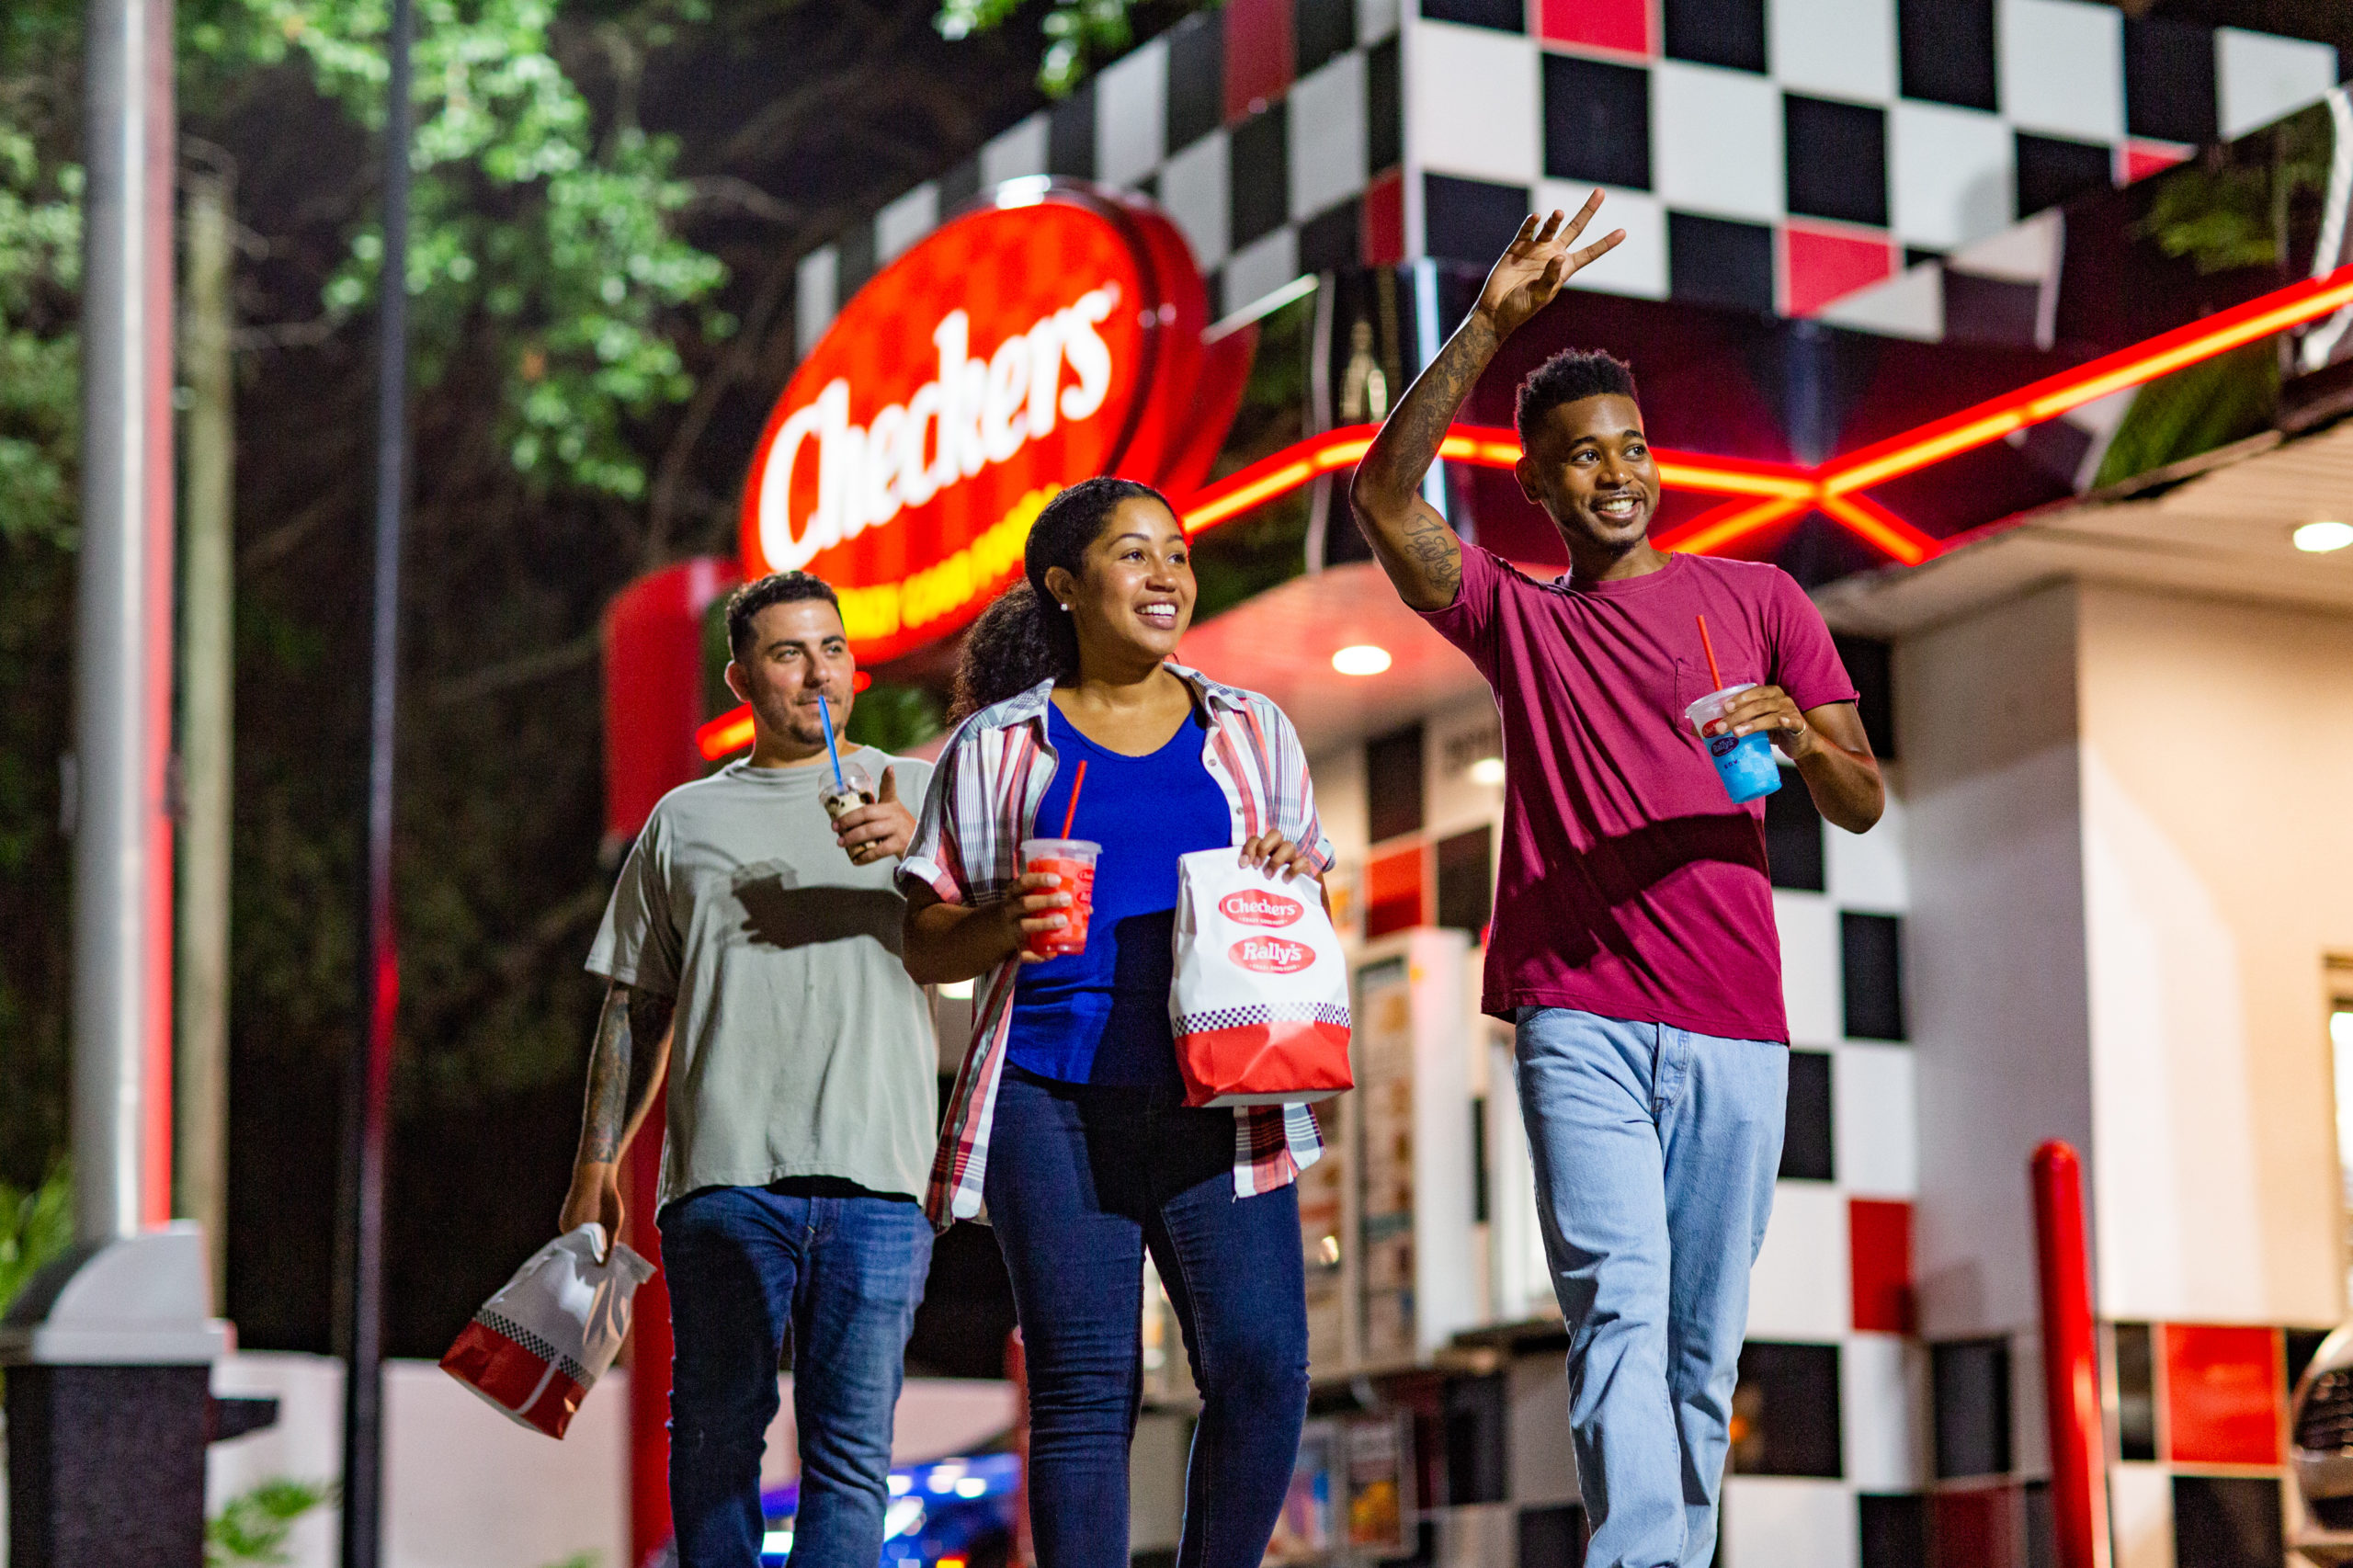 Guests Smiling in front of Checkers Restaurant